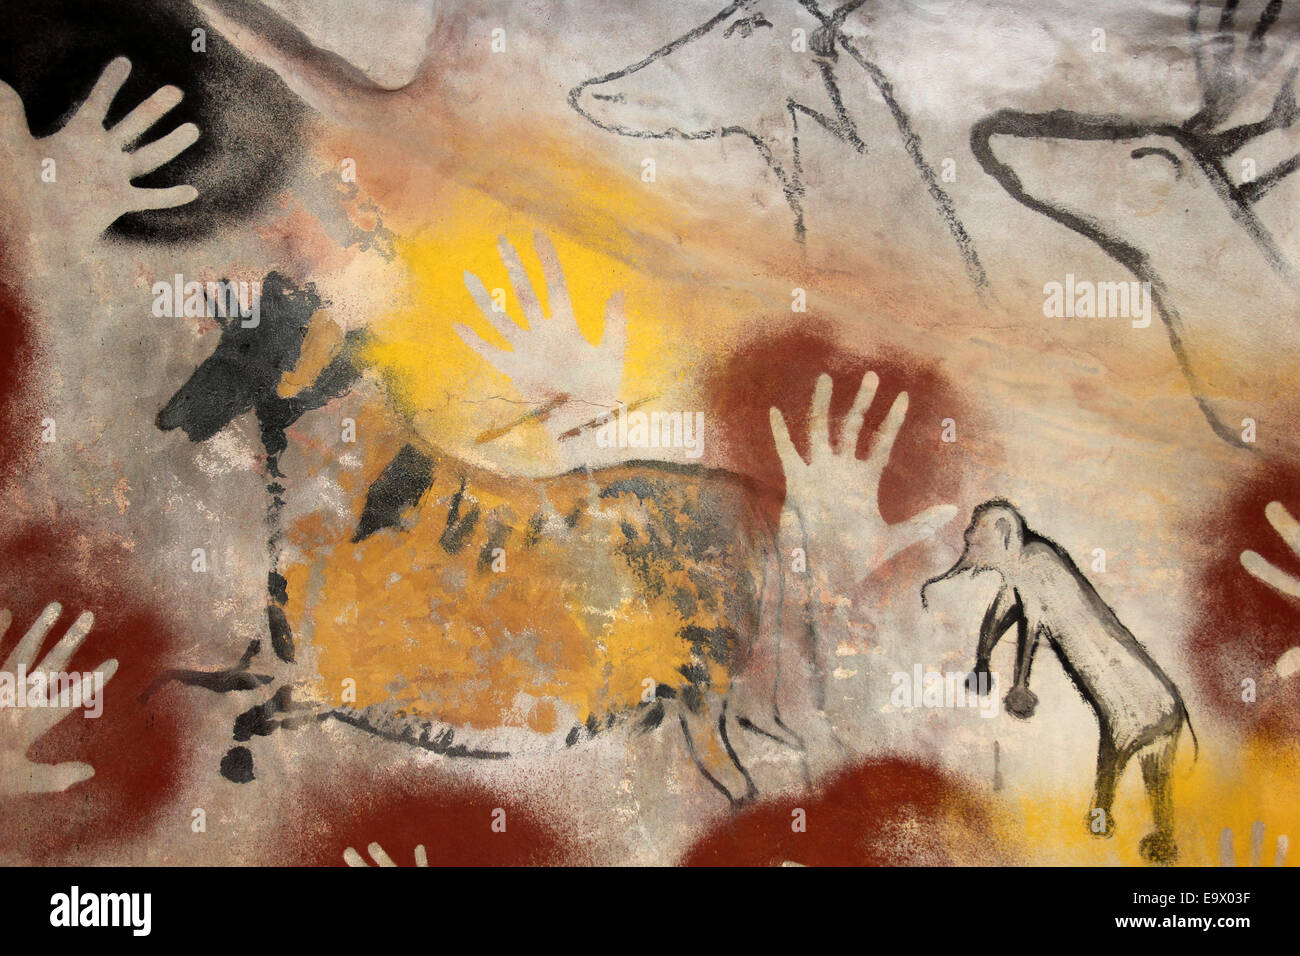 Modern Reproduction Of Cave Paintings And Hand Stencil Prints Stock Photo